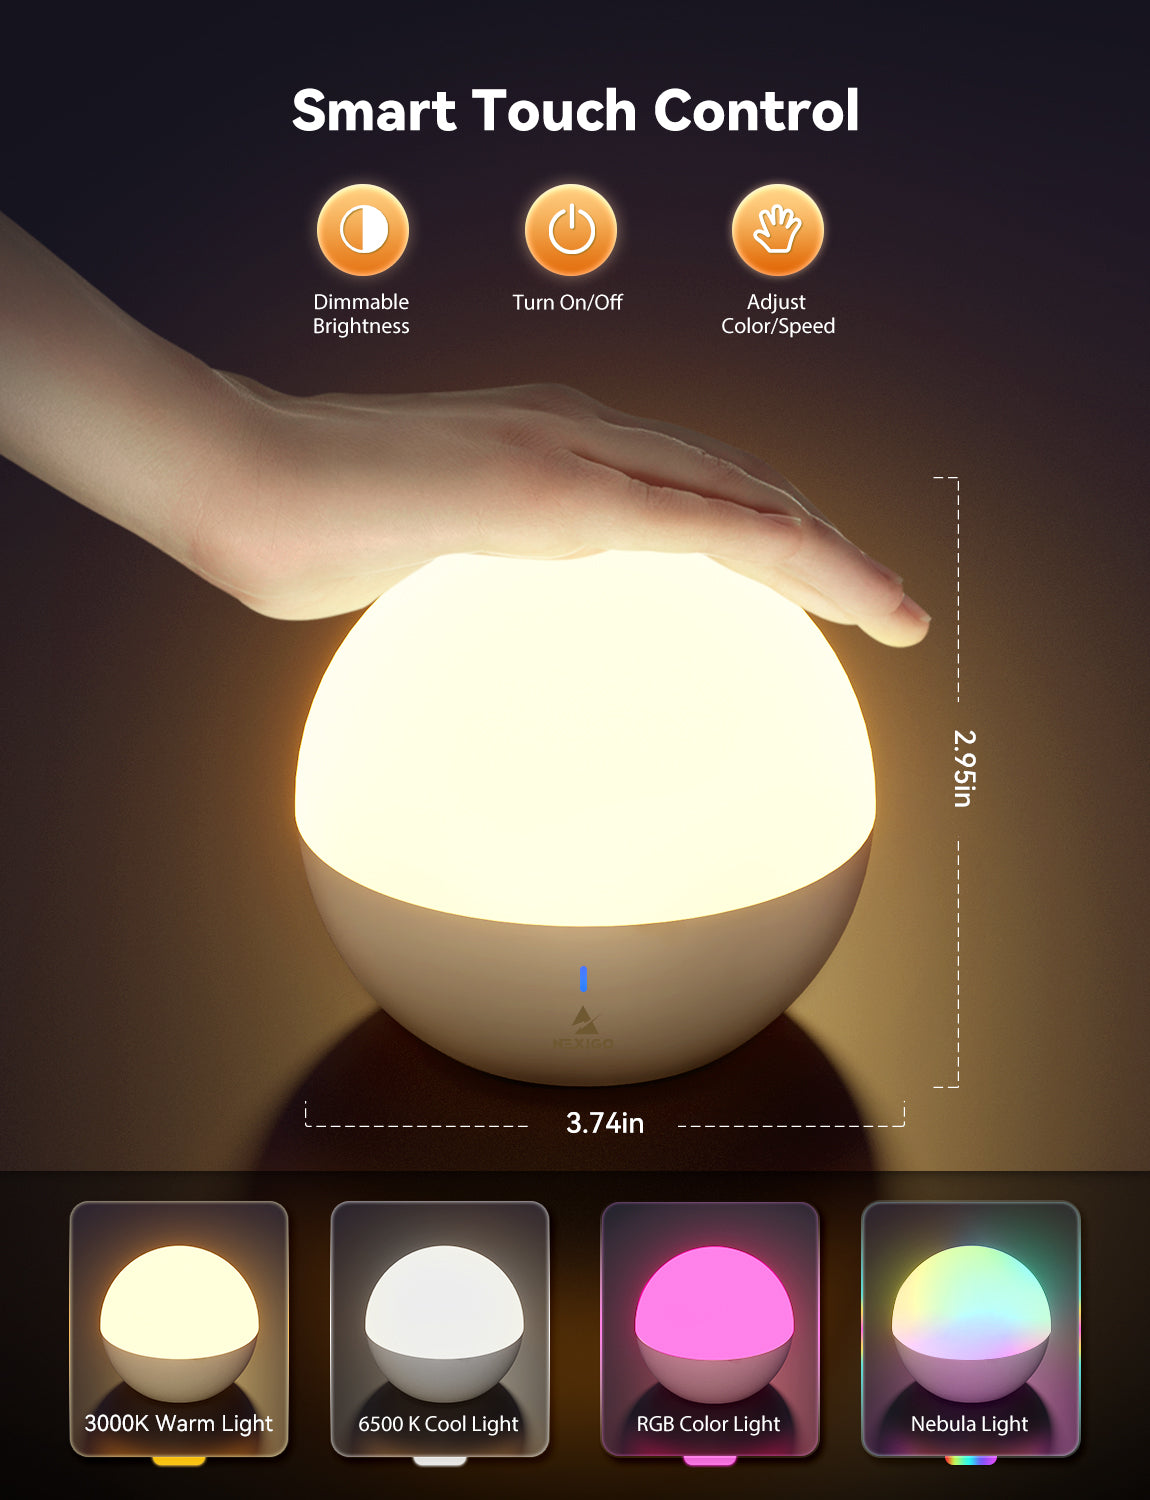 Touch the top of the palm-sized light to power on/off, adjust brightness, and change color/speed.